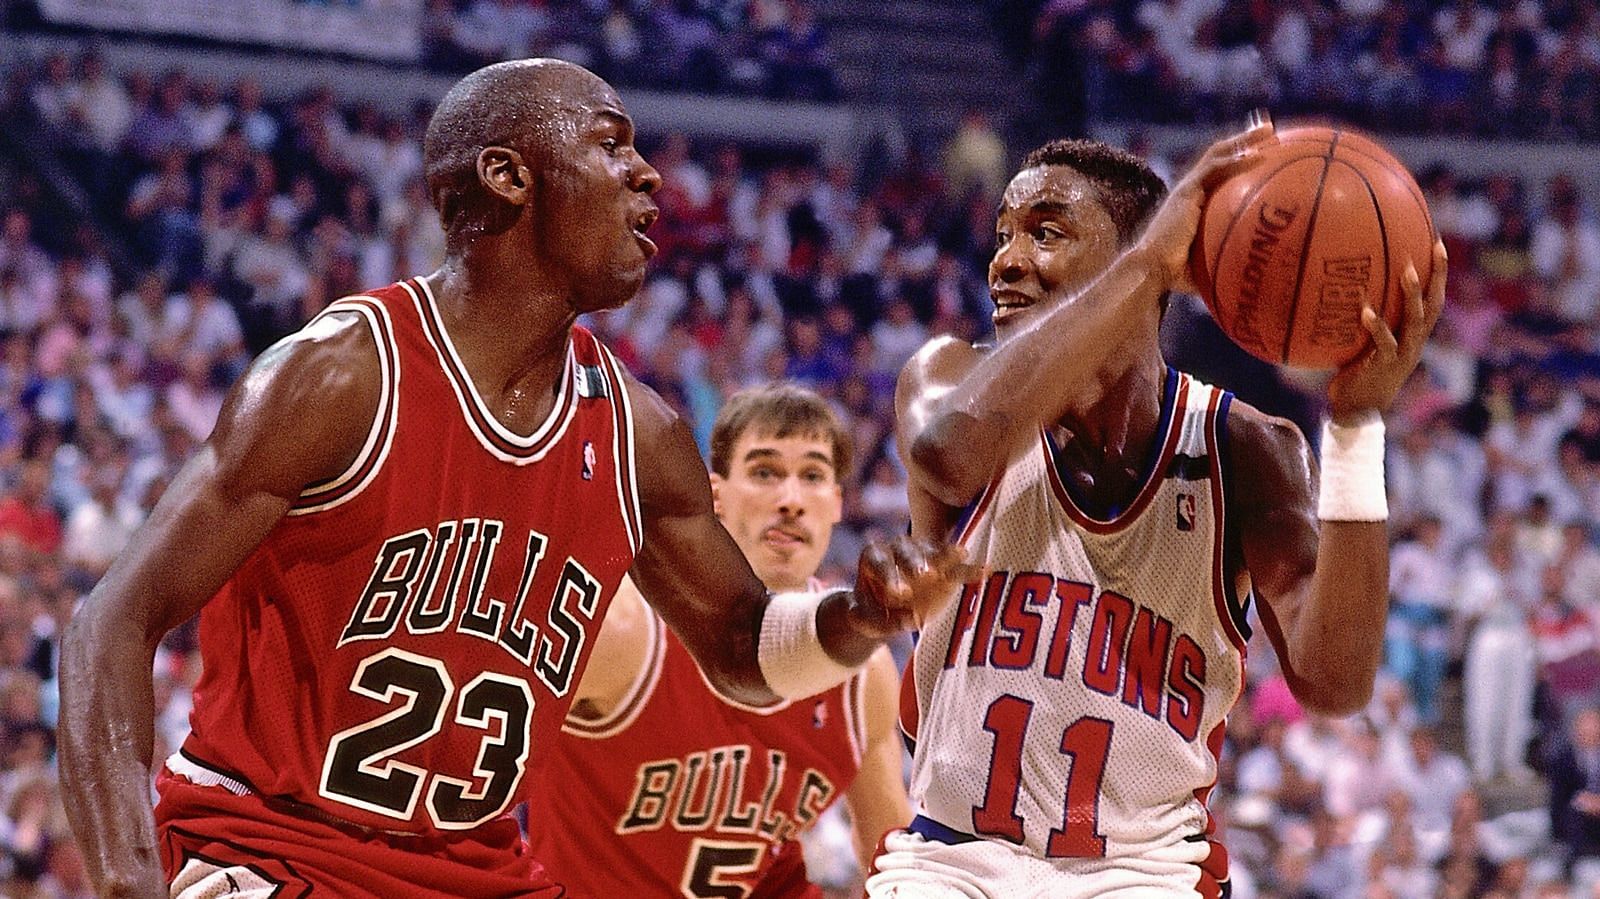 Michael Jordan “Was Afraid to Say Anything” in an Elevator Despite Intense  Rivalry With Isiah Thomas, Just to Safeguard His Public Image in the 1980s  - EssentiallySports